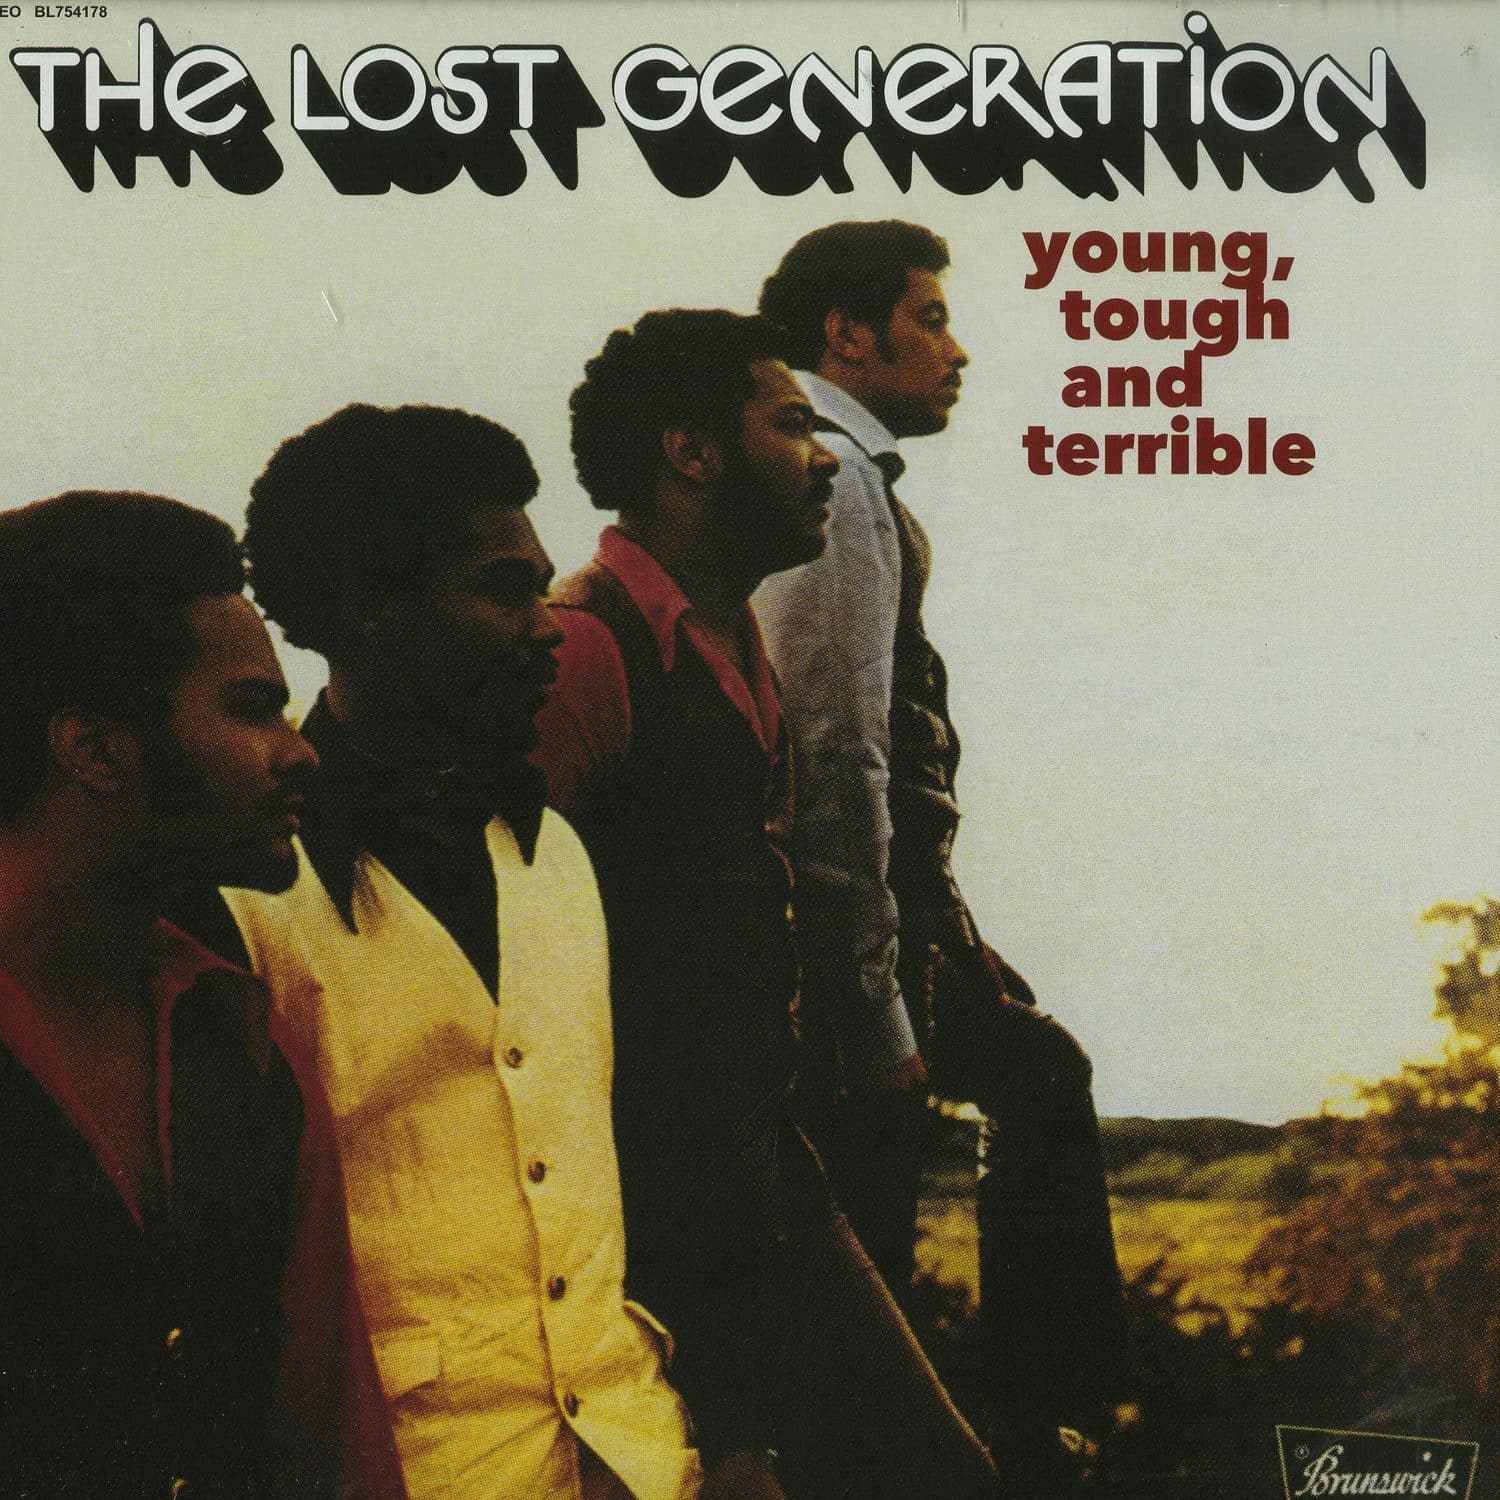 The Lost Generation - YOUNG, TOUGH AND TERRIBLE 